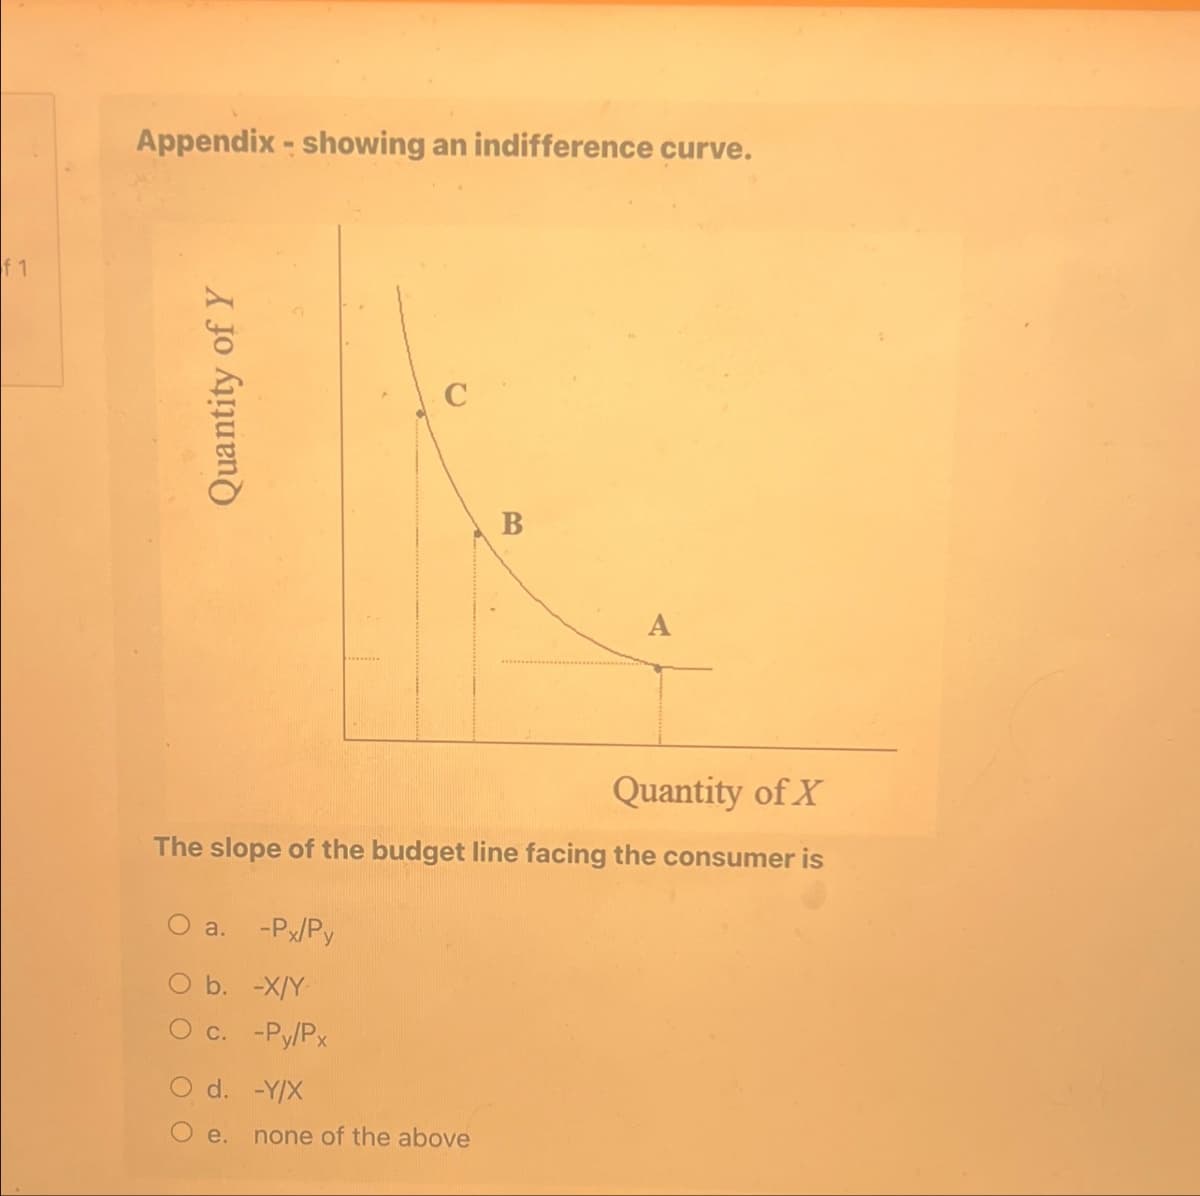 f 1
Appendix - showing an indifference curve.
Quantity of Y
C
B
Quantity of X
The slope of the budget line facing the consumer is
a.
-Px/Py
O b. -X/Y
O c. -Py/Px
d. -Y/X
e. none of the above